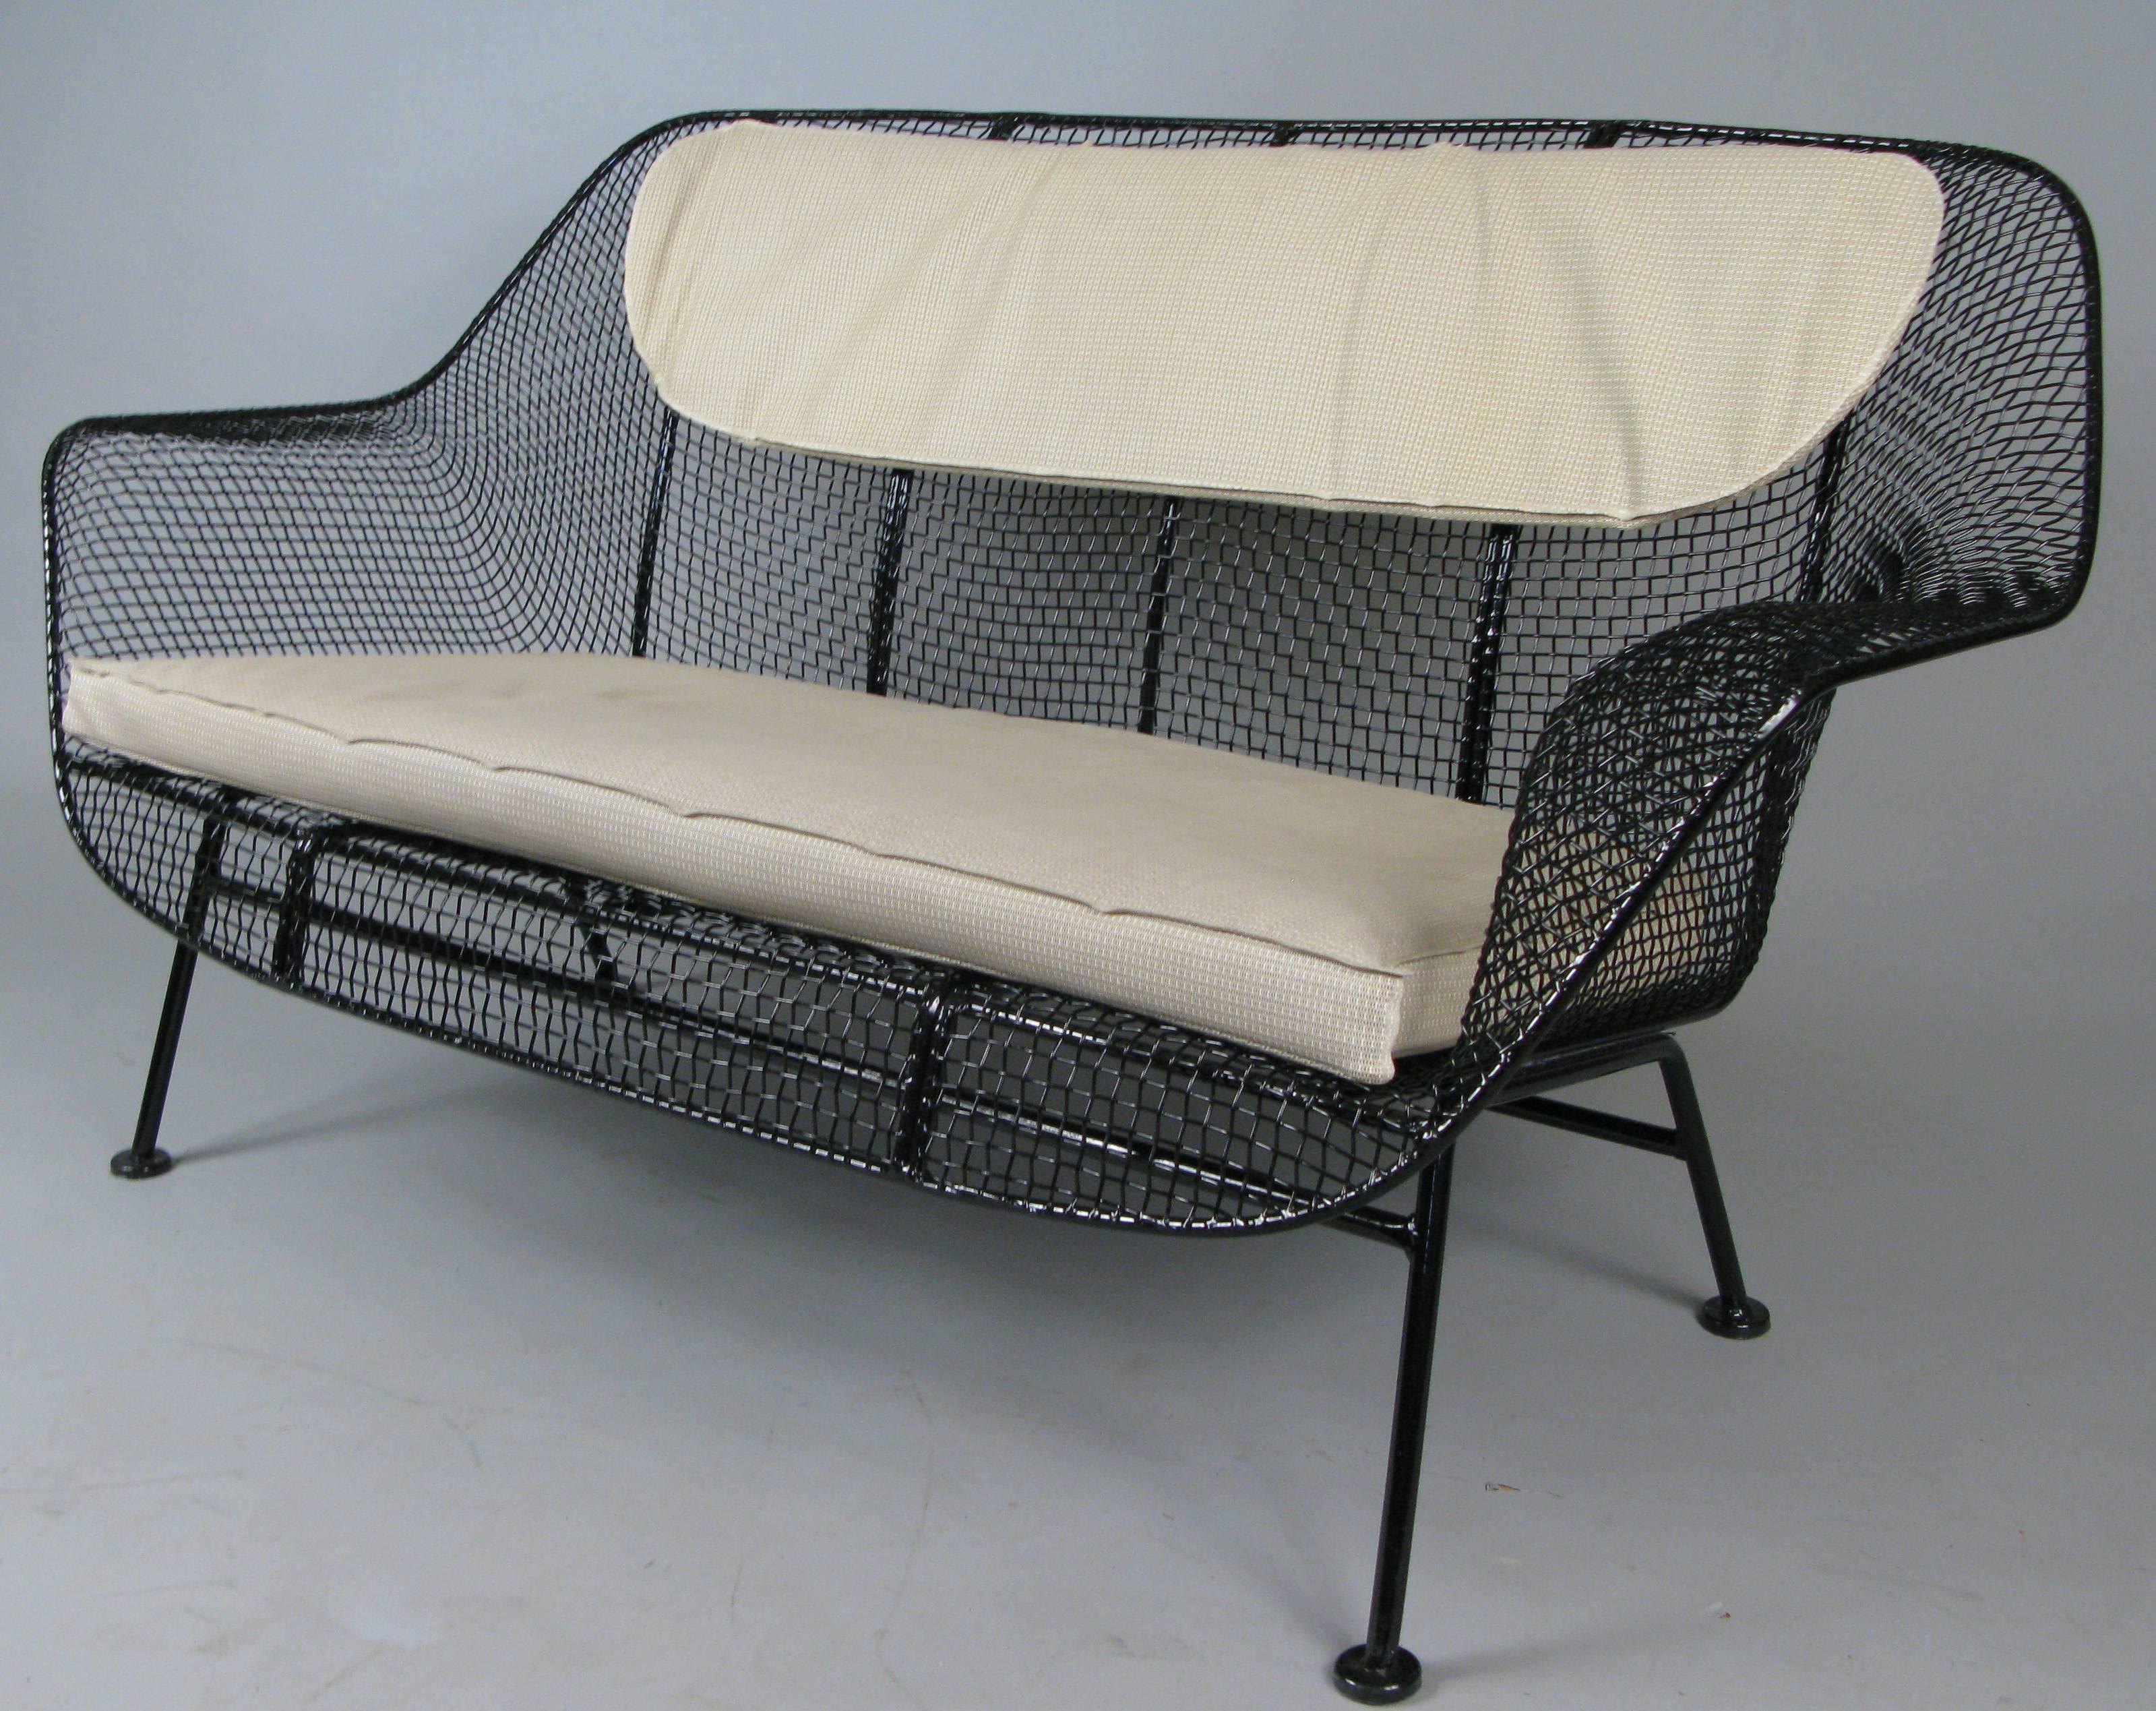 A 1950s wrought iron and steel mesh settee from John Woodard's iconic Sculptura series. Beautiful and Classic sculptural design, finished in black, but can be finished in any color you choose. Cushions not included but can be custom ordered in